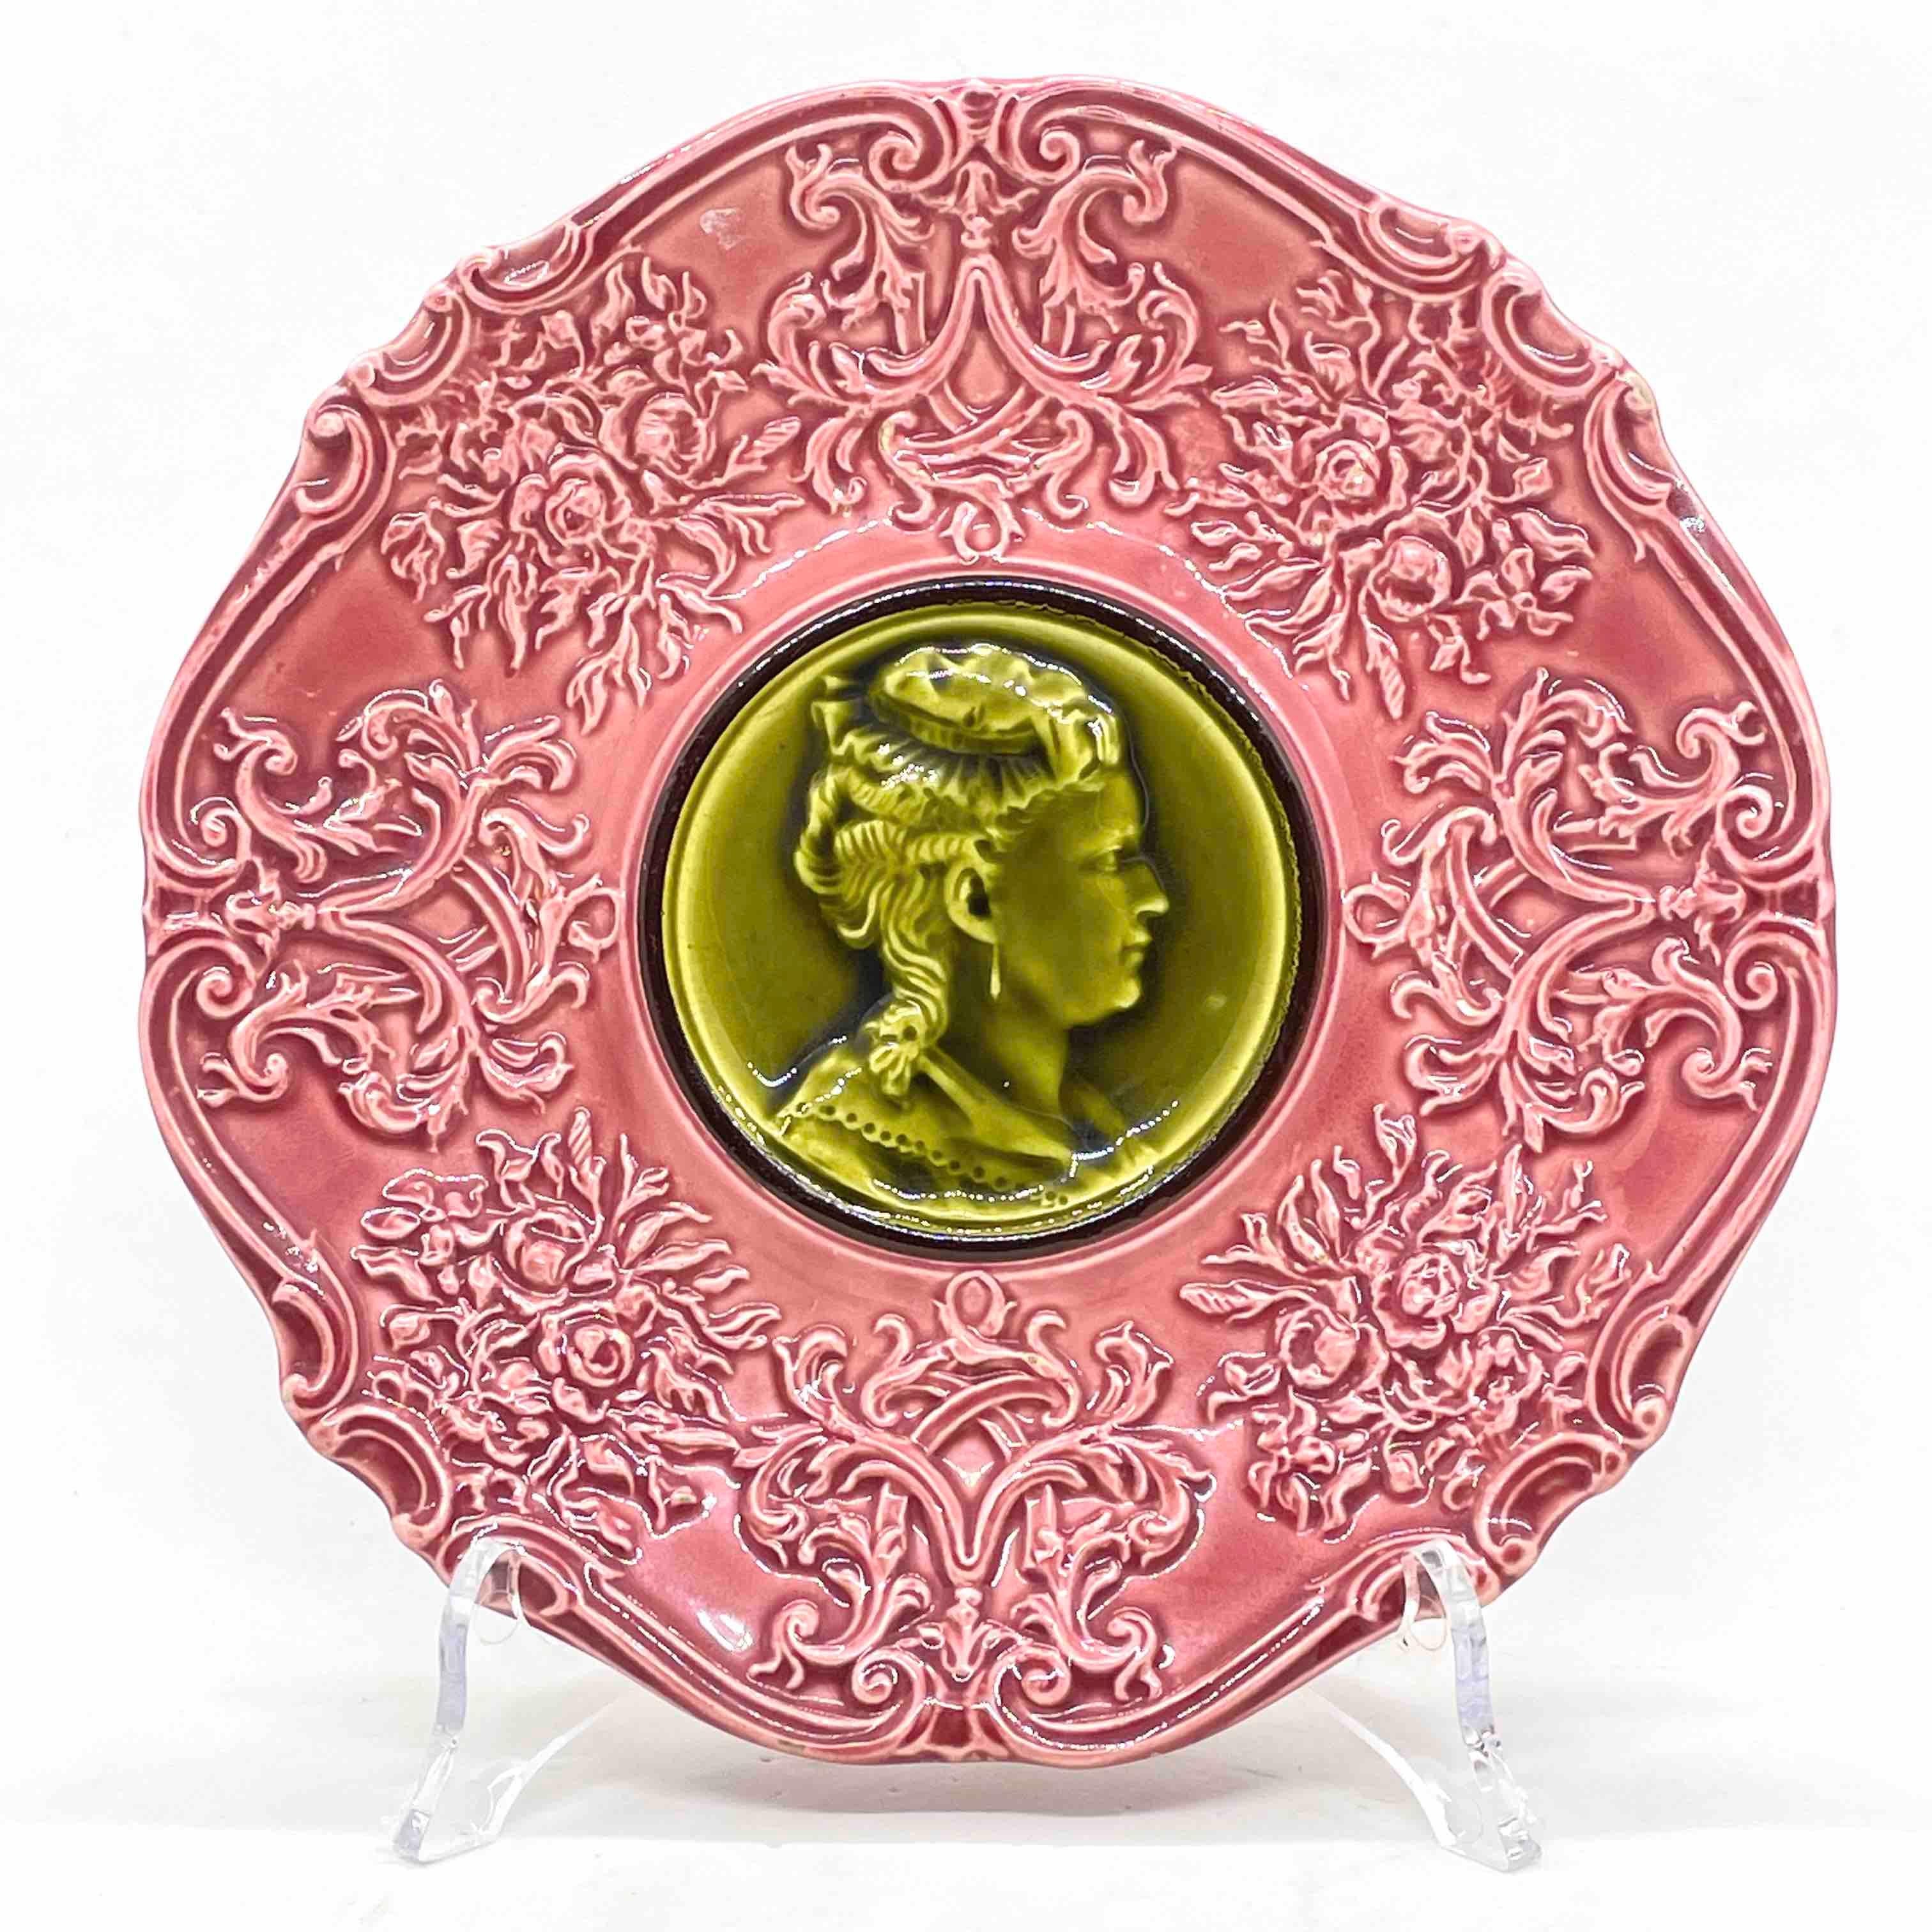 19th century majolica plates by Villeroy & Boch in unusual color combination of olive green and majolica pink with relief design on front. Nice addition to your table or just to display. Please see detailed pictures for antique as found condition.